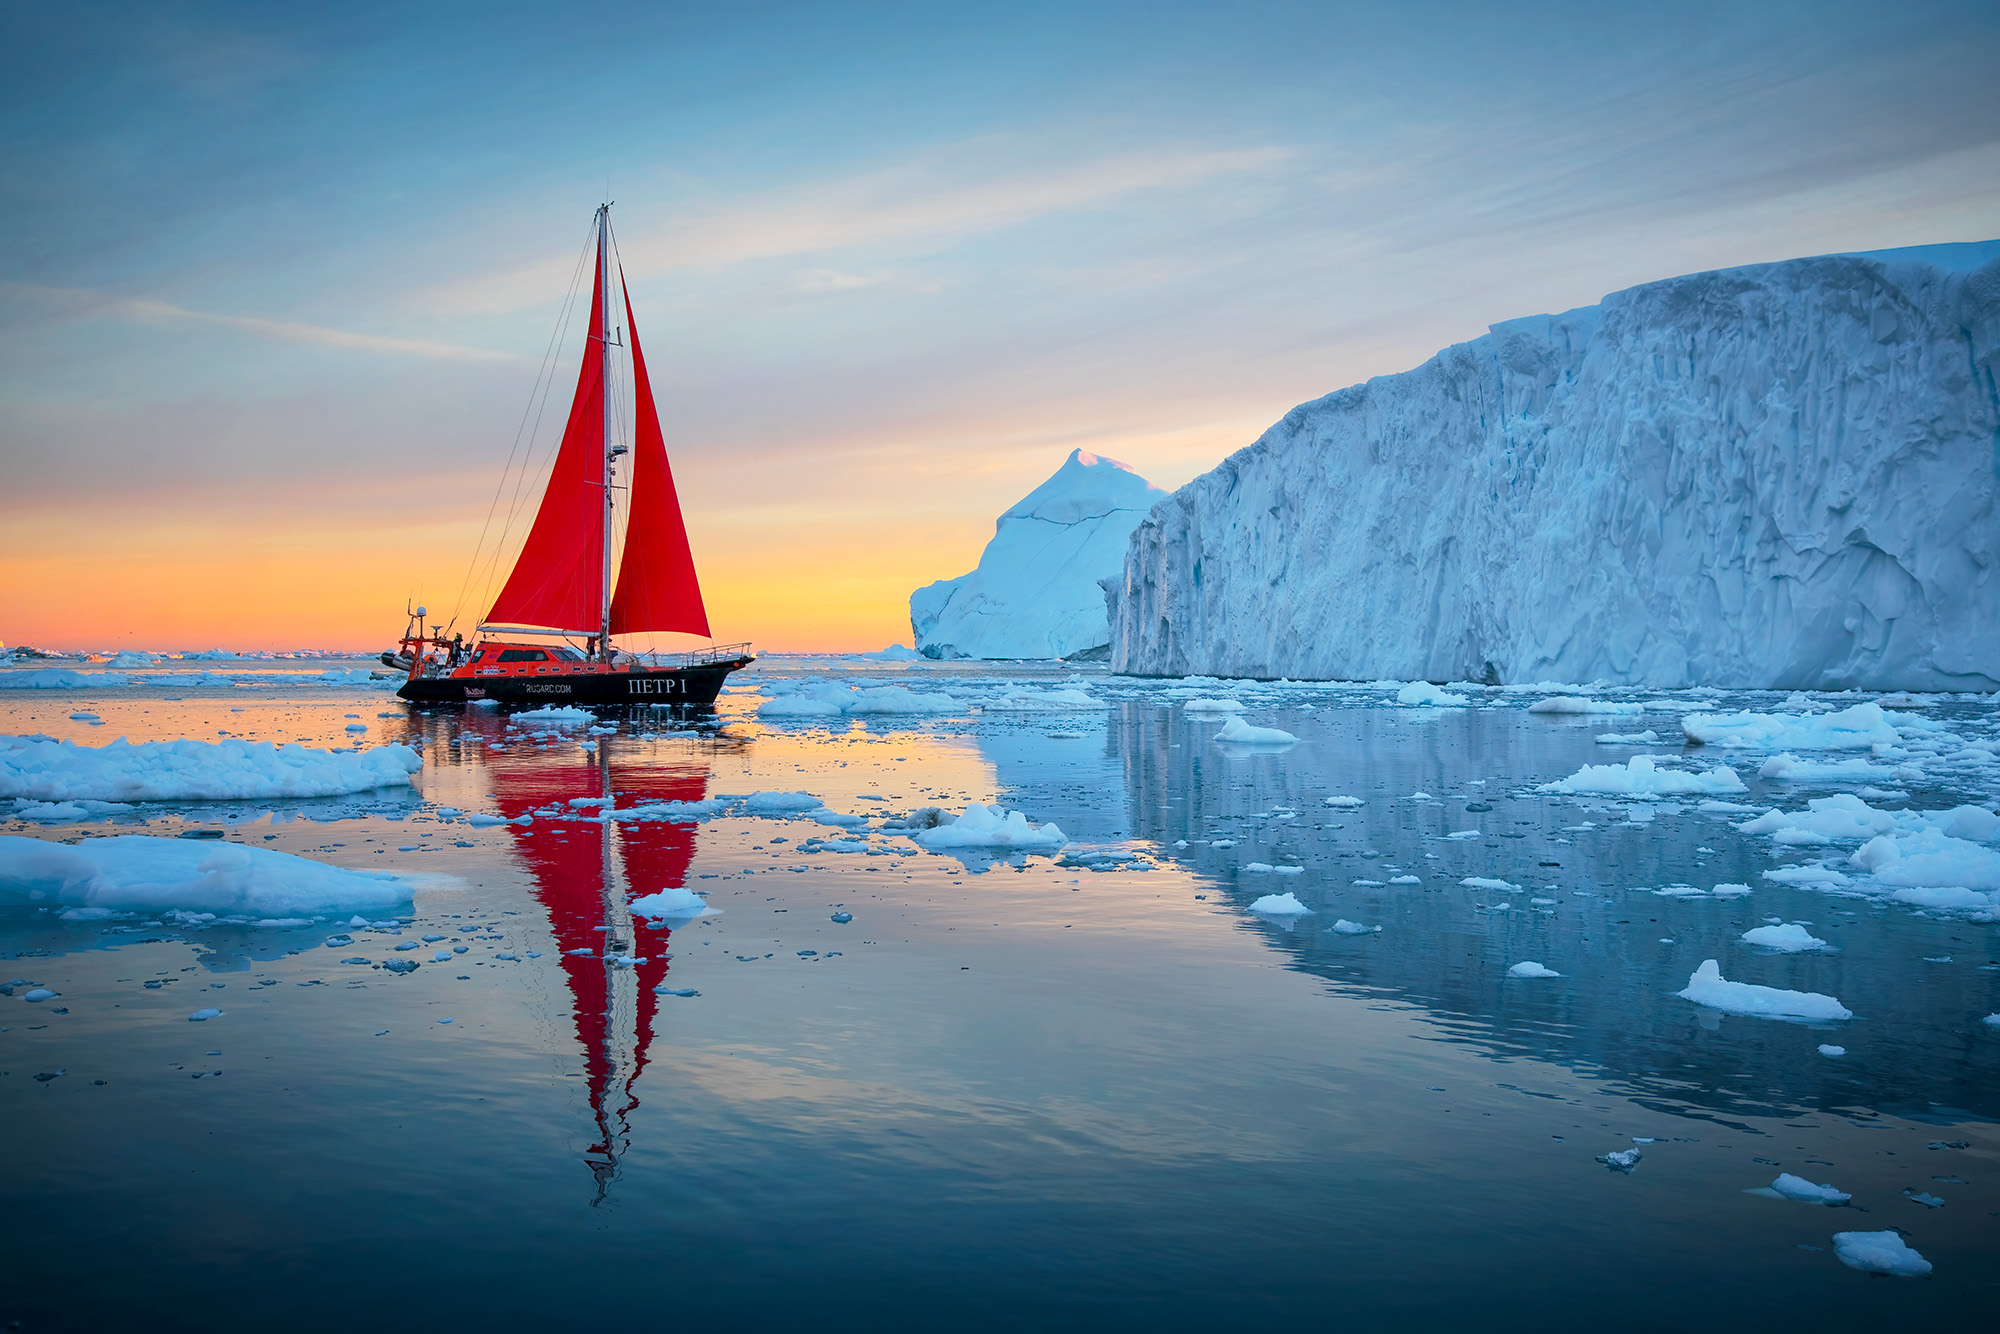 Captured in Disko Bay near Ilulissat, Greenland, this image portrays a sailboat with vibrant red sails gracefully approaching...